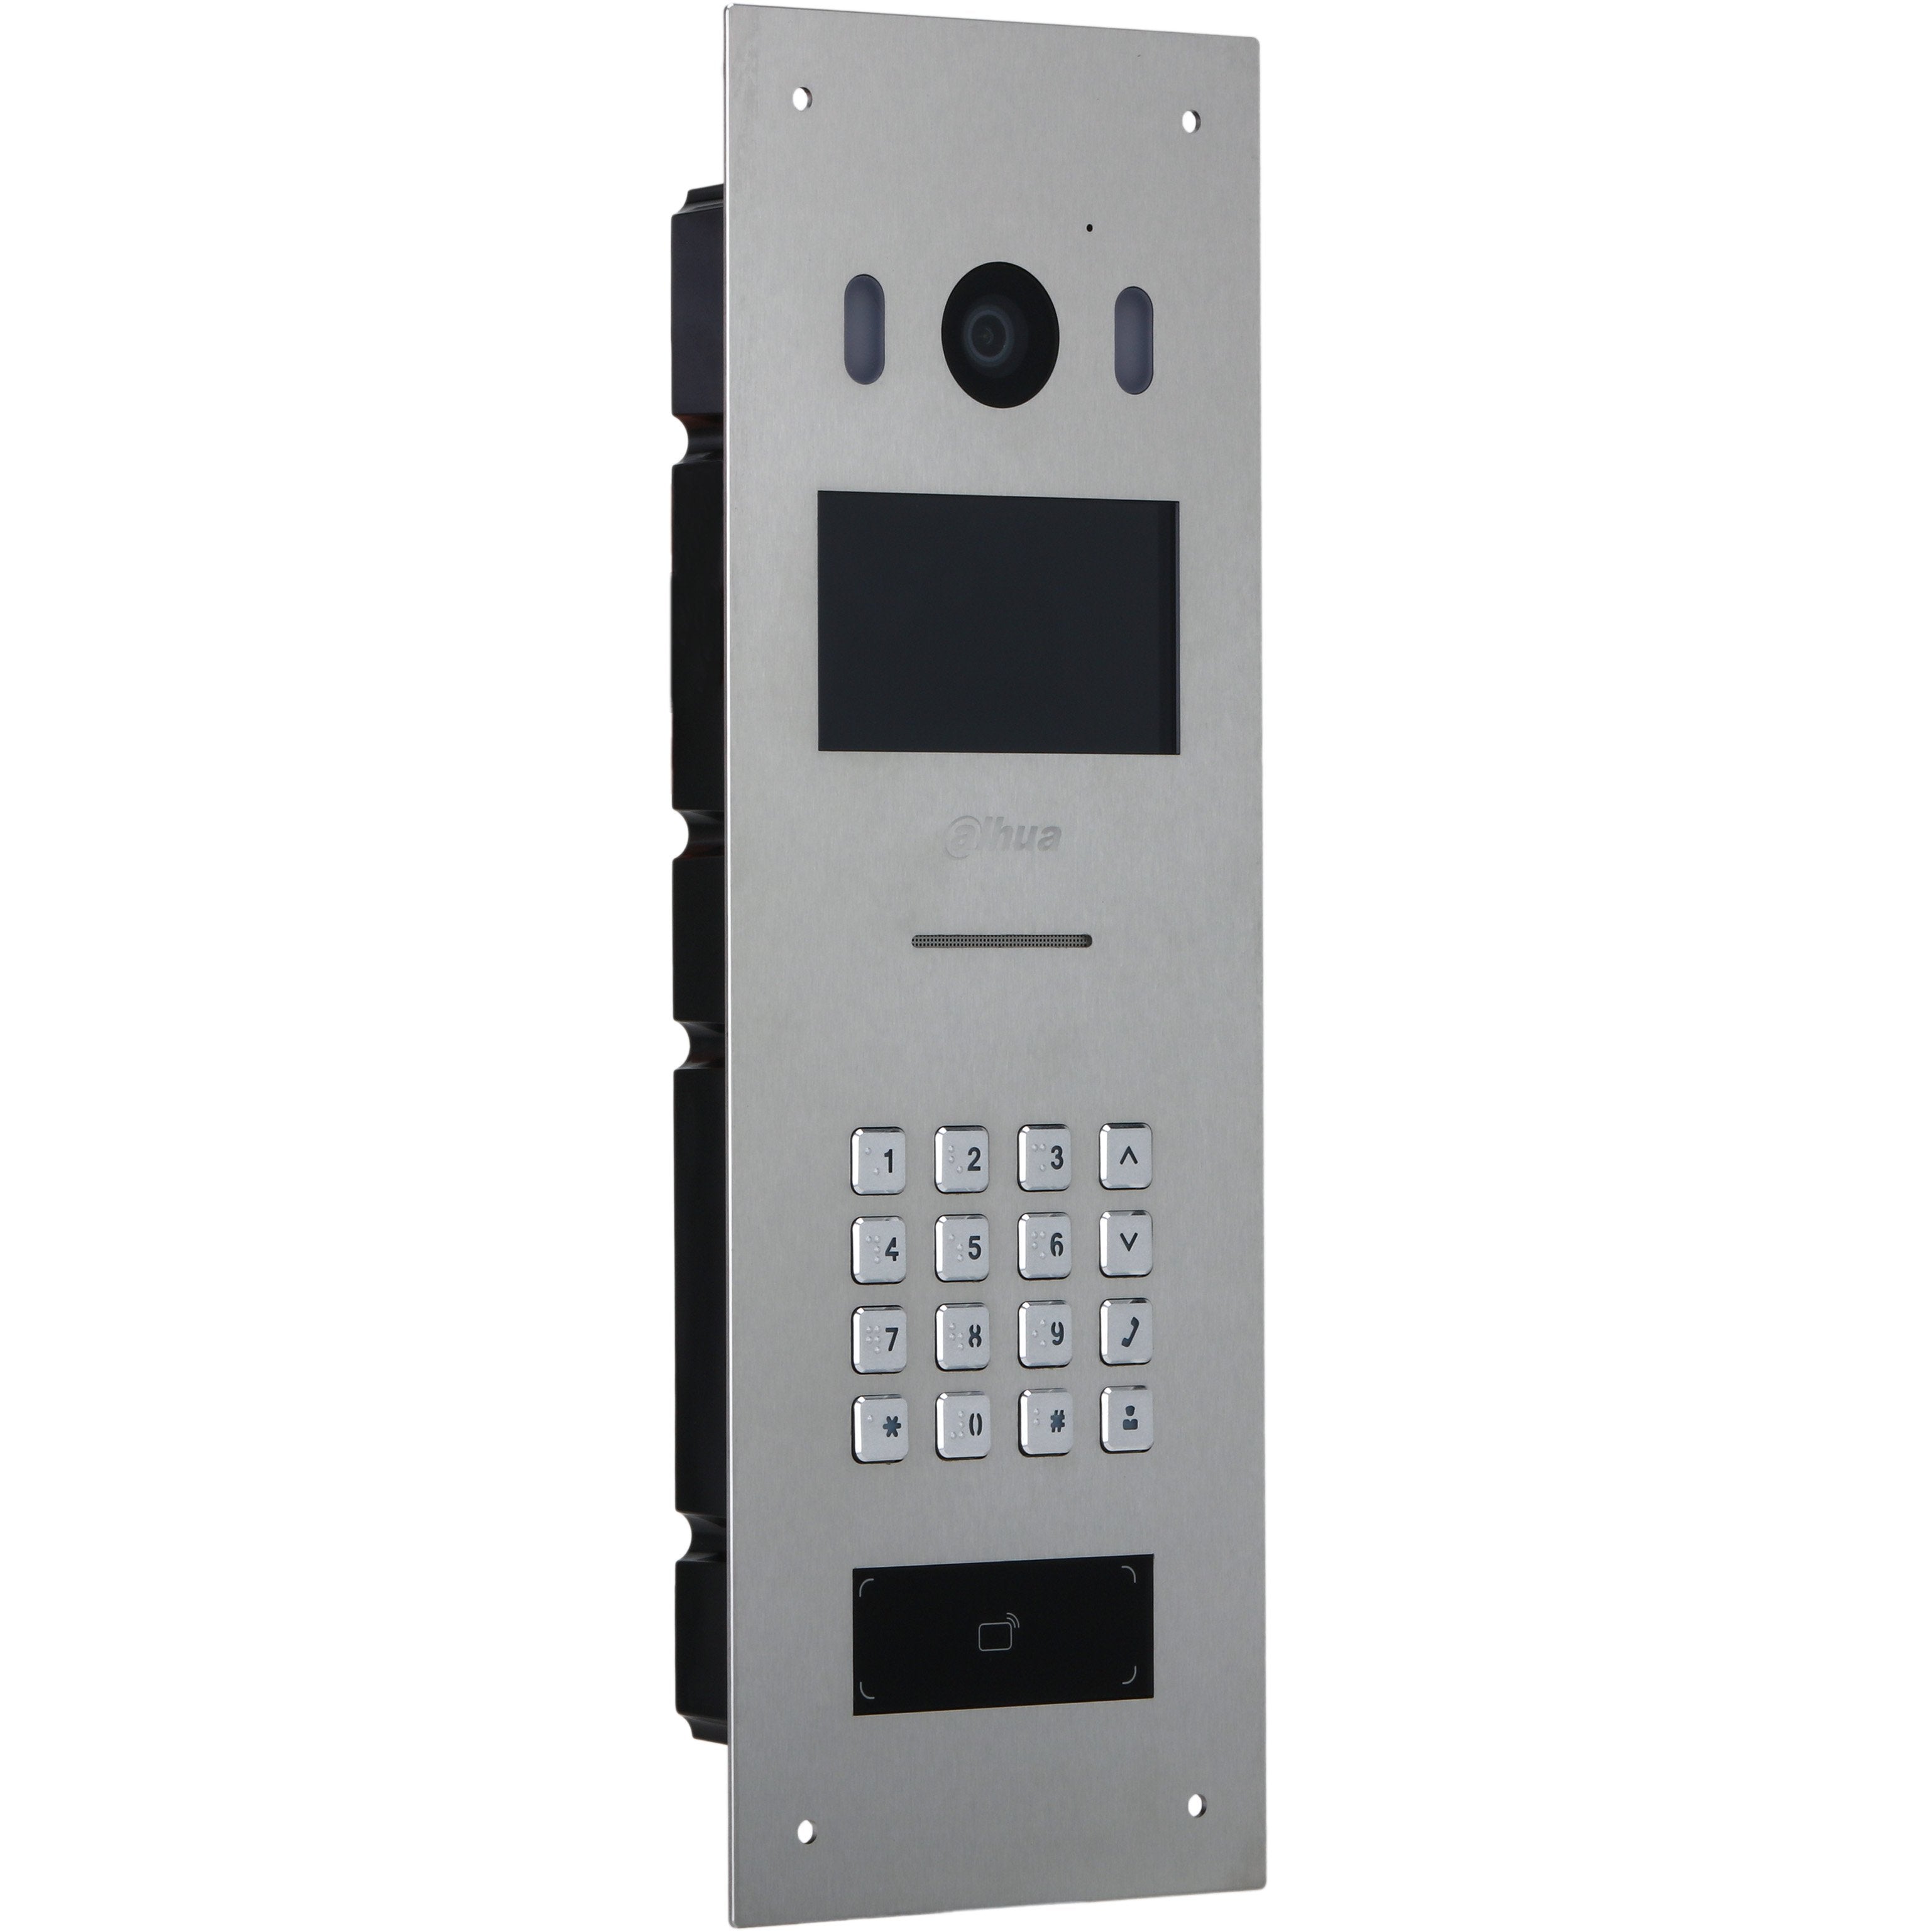 Dahua IP External Station, 2MP CMOS Camera, 4.3" Screen, Stainless Steel Panel, Integrated Password / Mifare Card Reader, IK08, IP65, 12VDC (**REQUIRES EITHER - Surface Plate: VTM57R, Flush Plate: VTOB103)